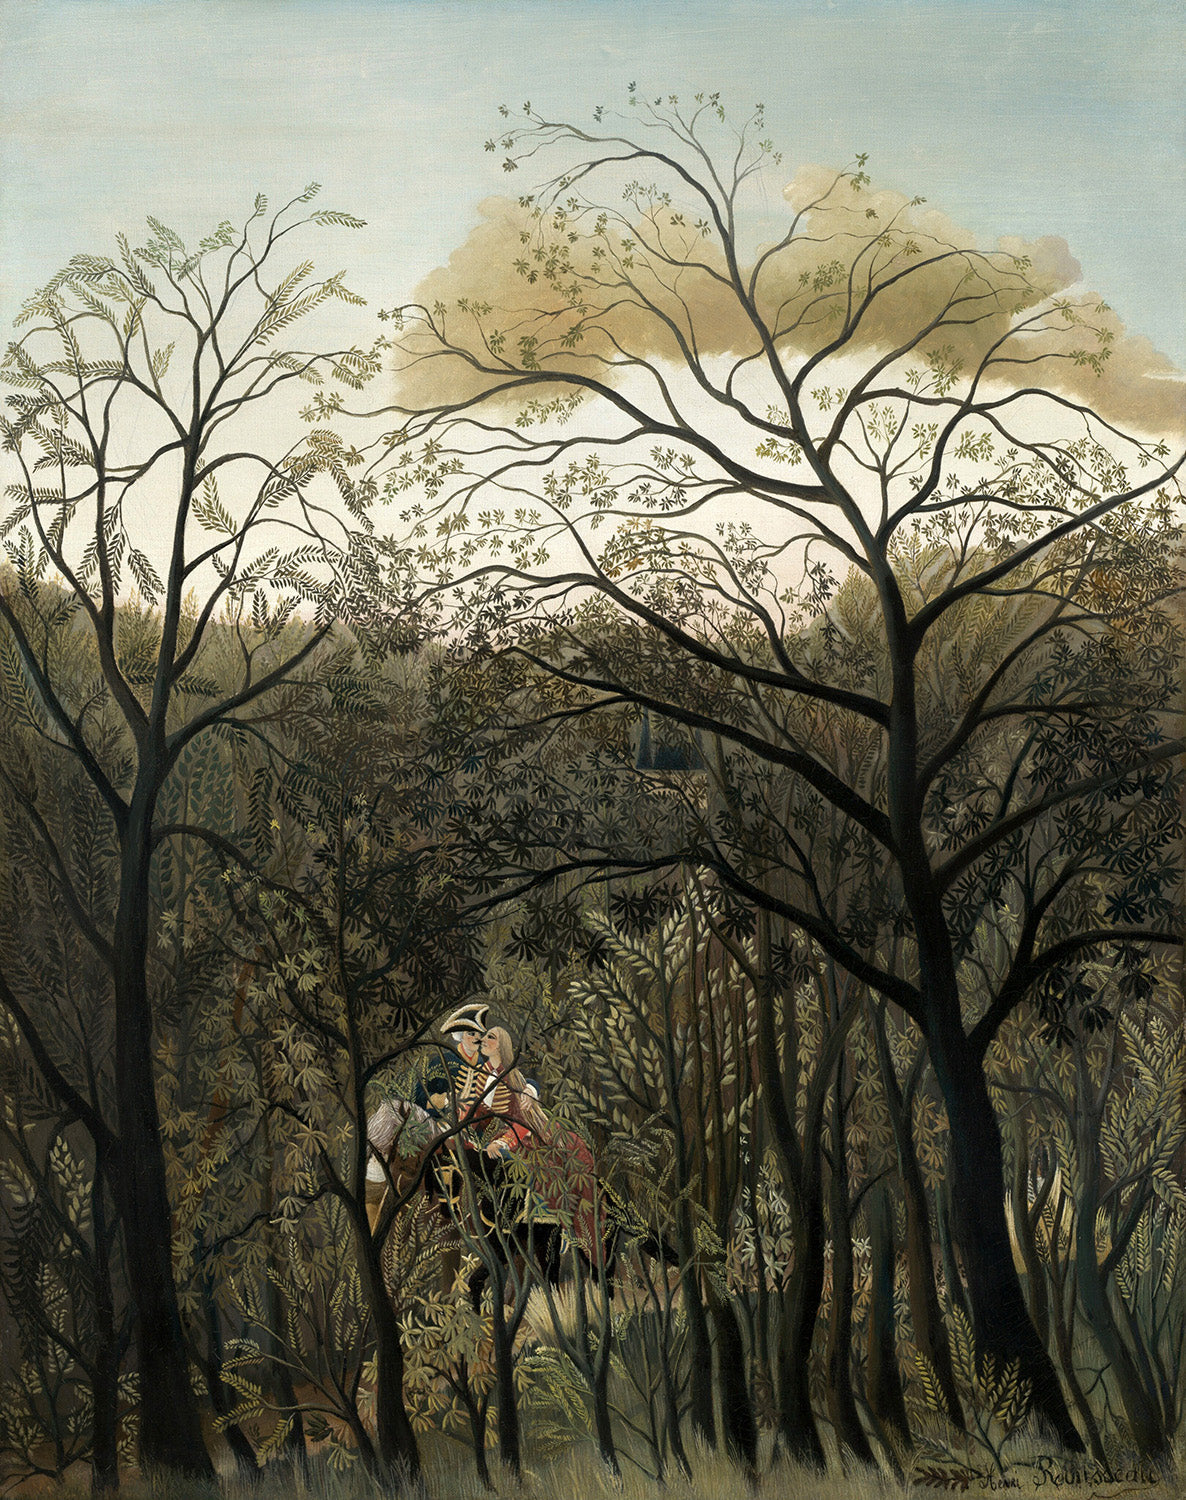 Rendezvous in the Forest by Henri Rousseau Art Print